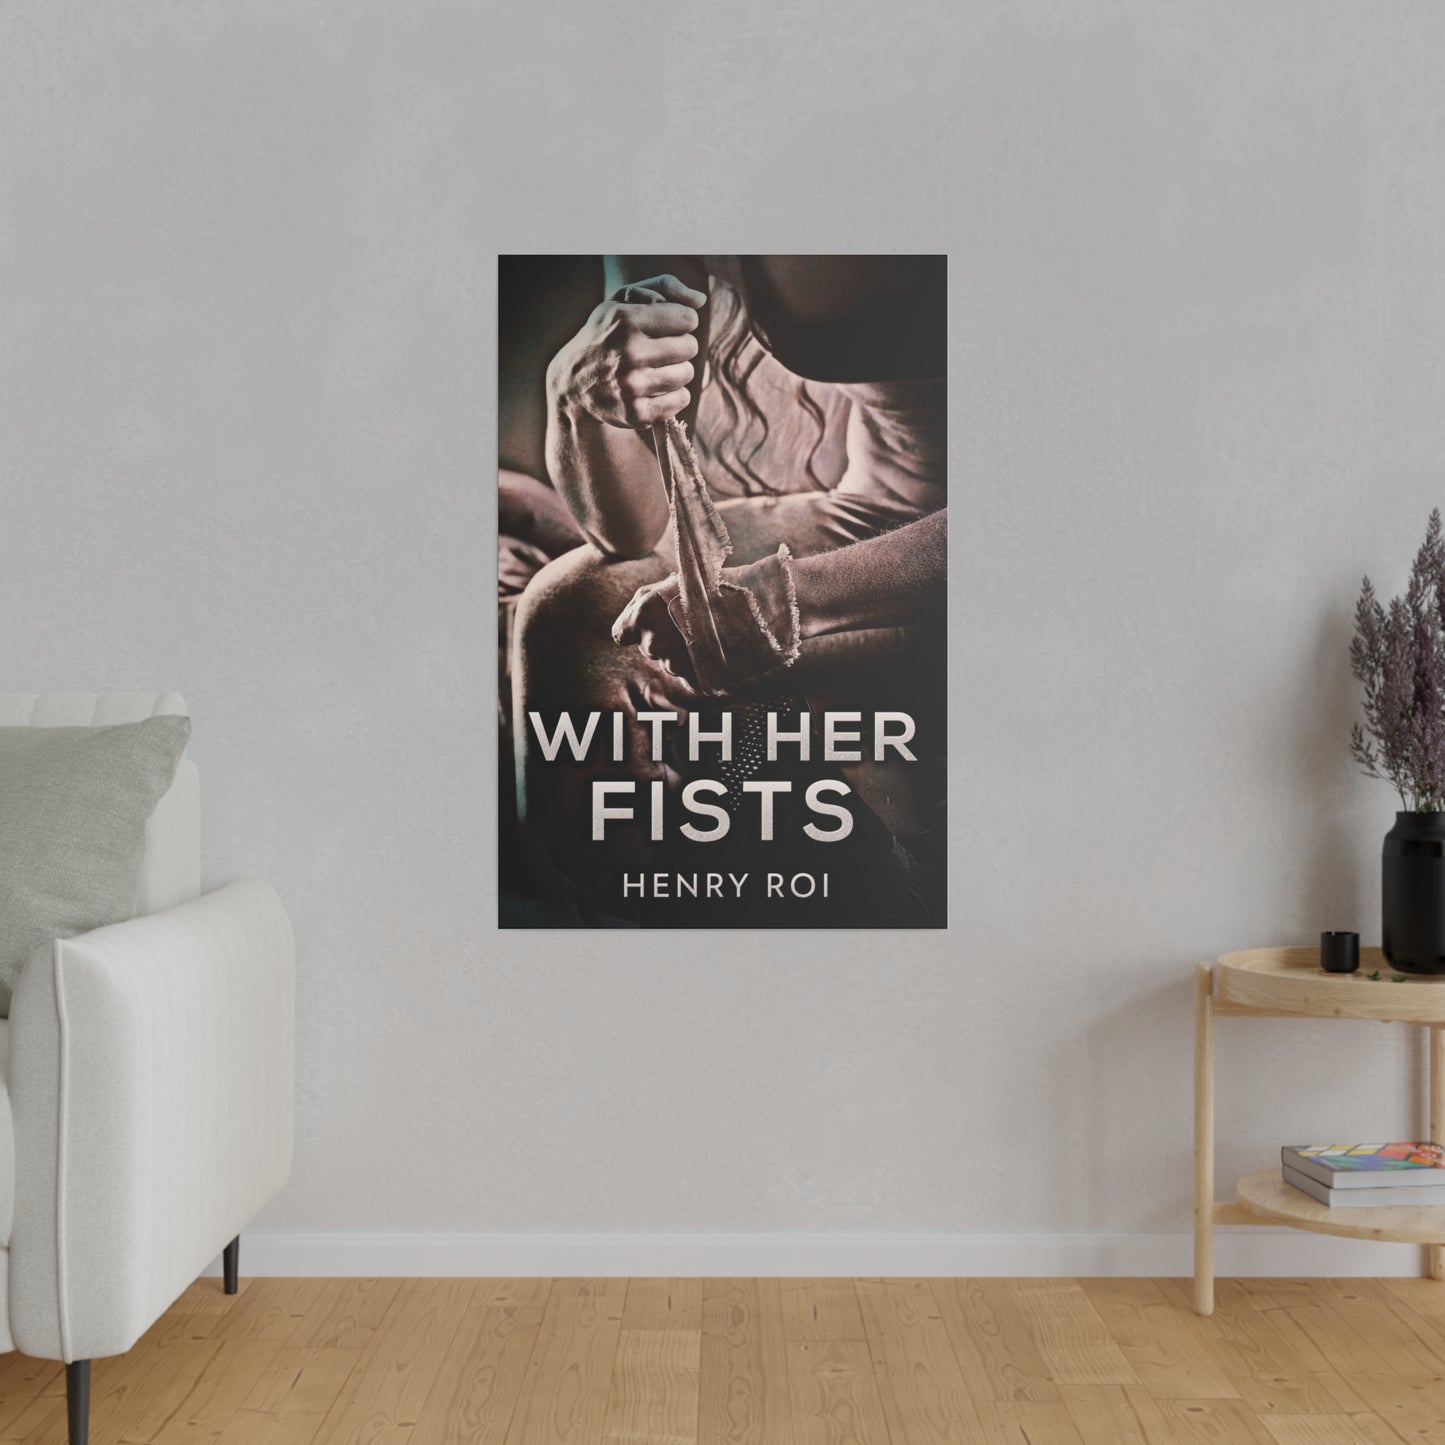 With Her Fists - Canvas